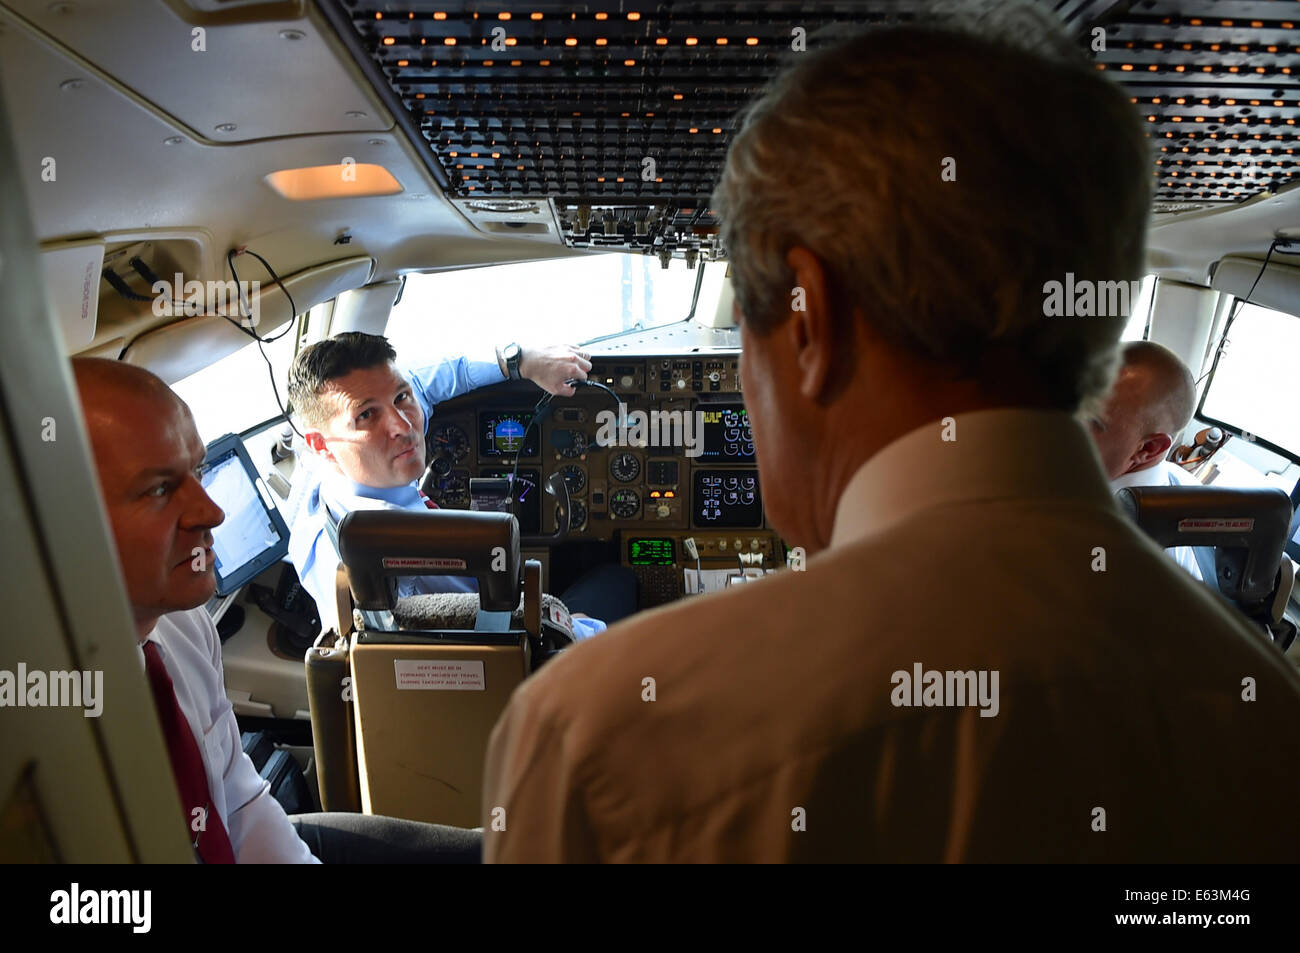 U.S. Secretary of State John Kerry chats with the flight crew of his U.S. Air Force jet at Andrews Air Force Base in suburban Washington on August 6, 2014, before they set out on an around-the-world trip that will take them to Afghanistan, Burma, Australi Stock Photo